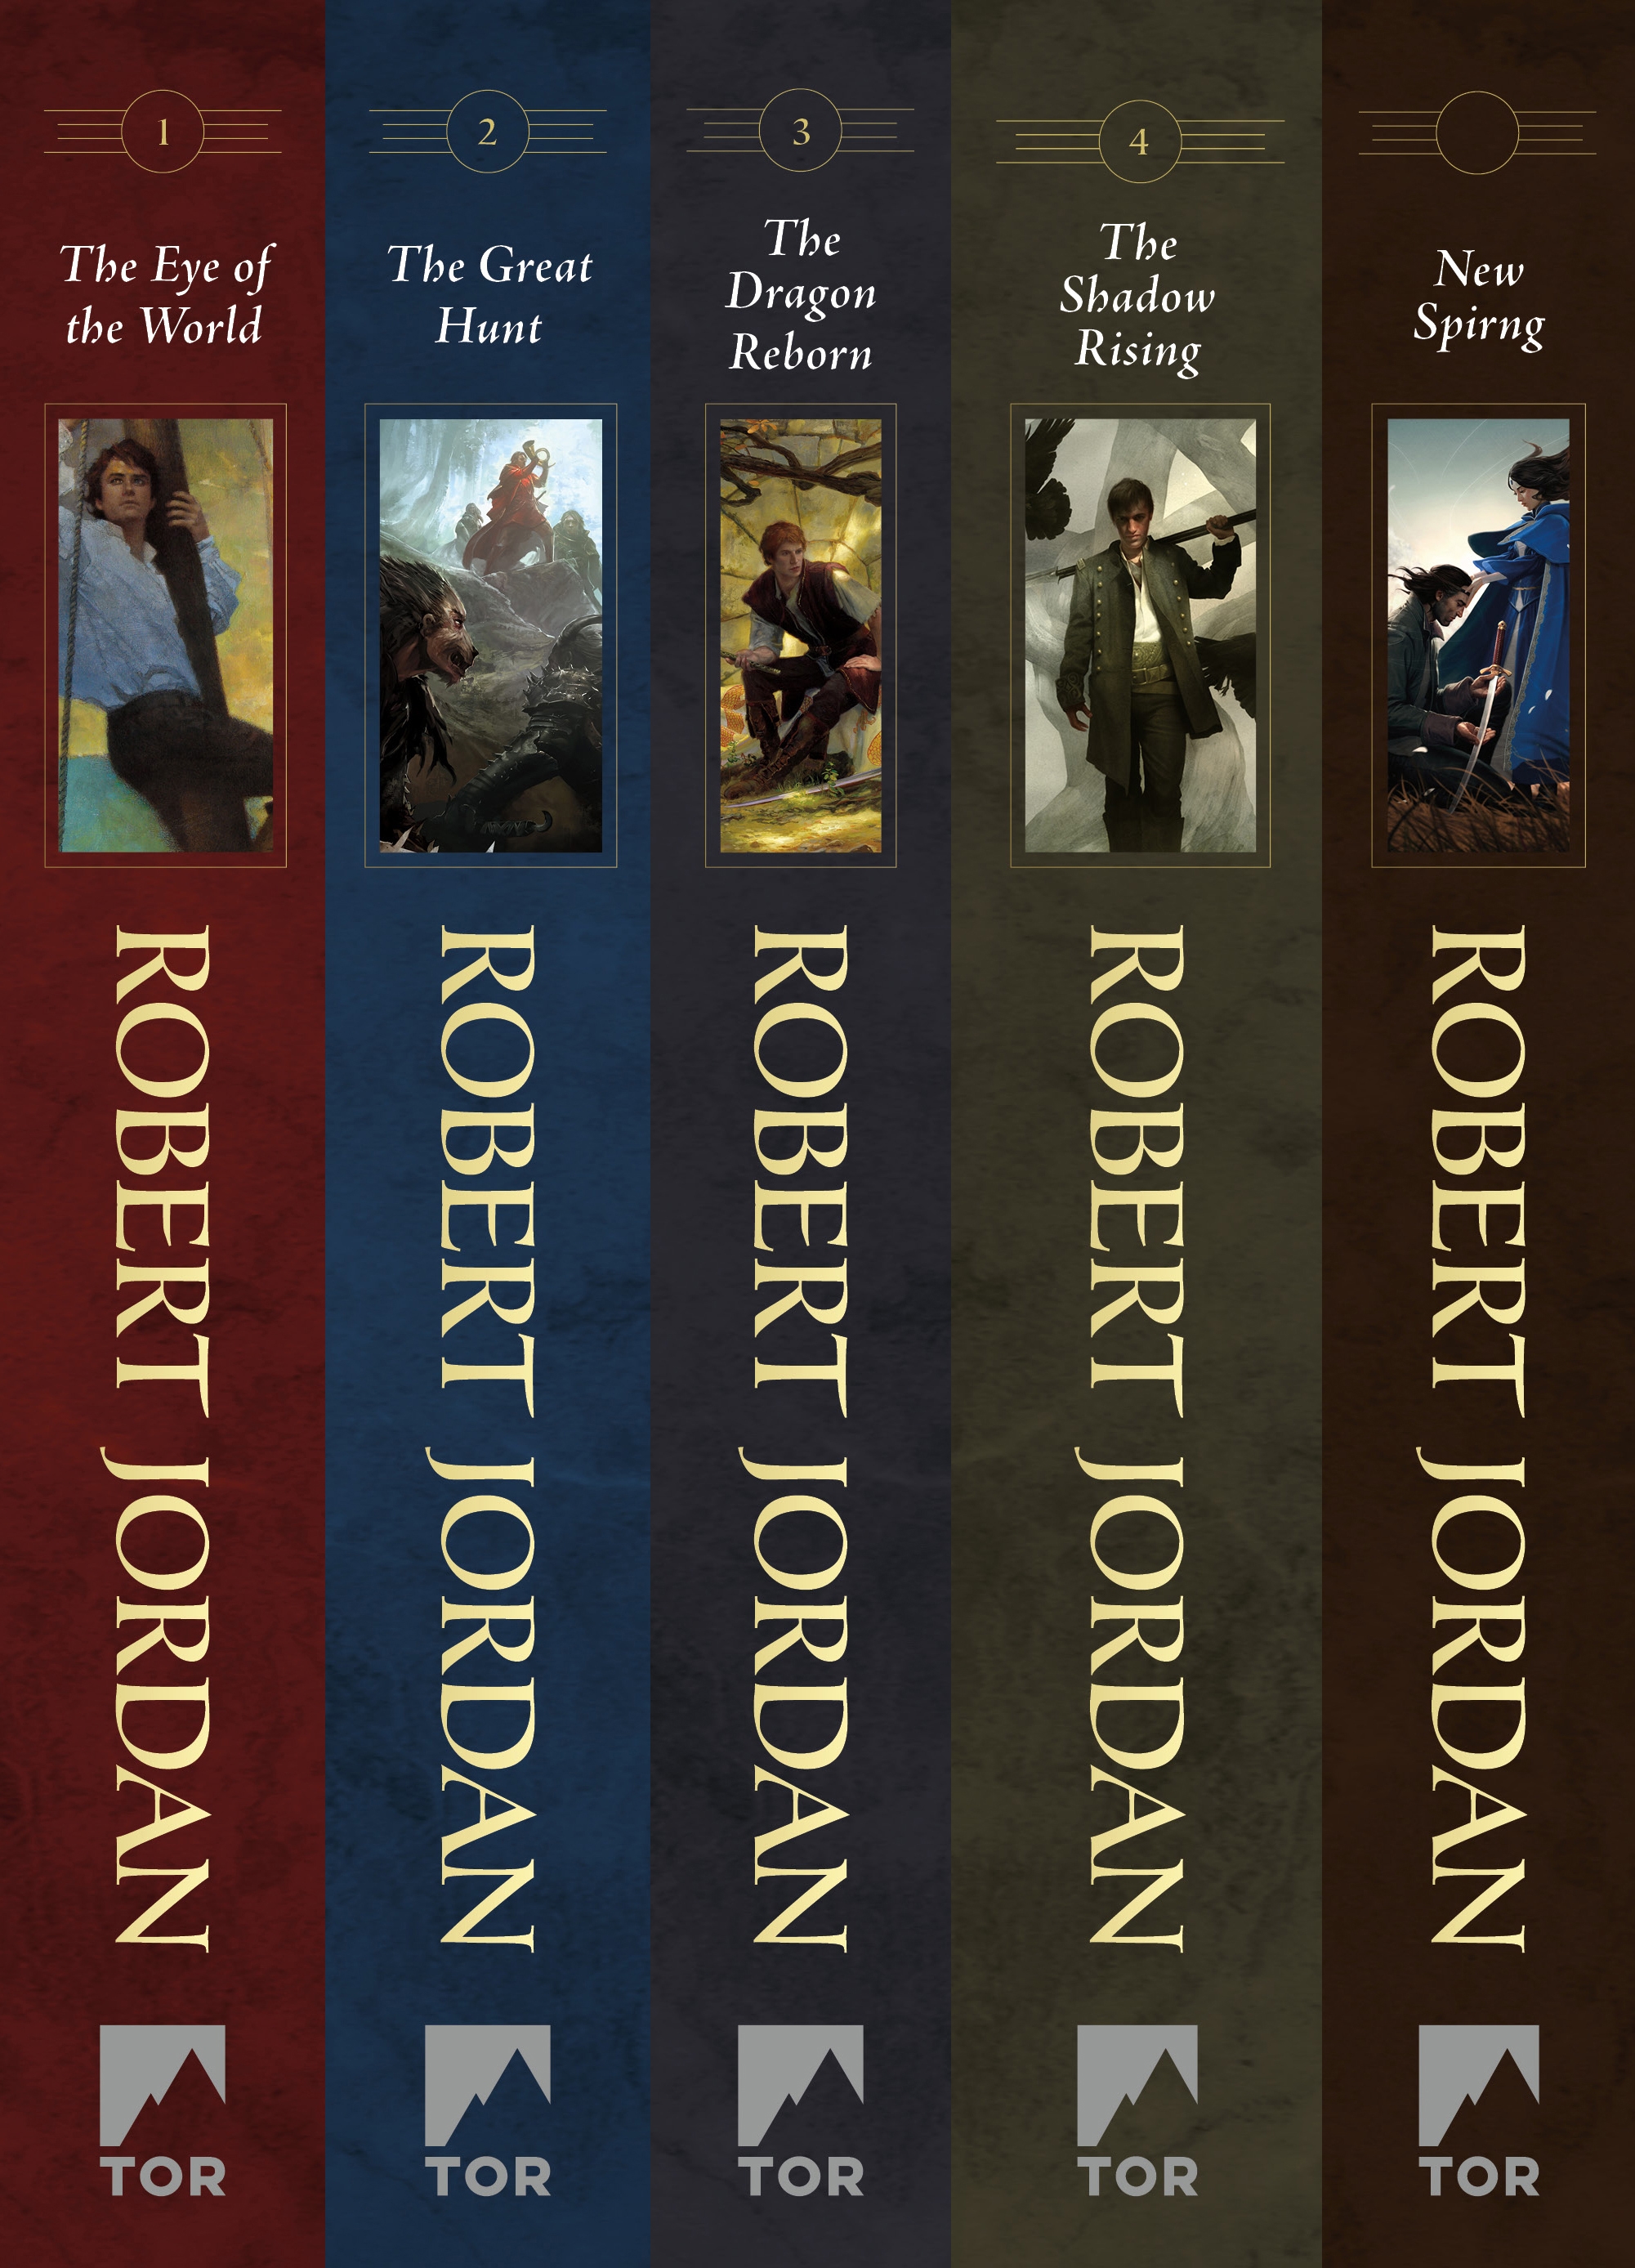 The Wheel of Time, Books 1-4 : (The Eye of the World, The Great Hunt, The Dragon Reborn, The Shadow Rising, New Spring: The Novel) by Robert Jordan